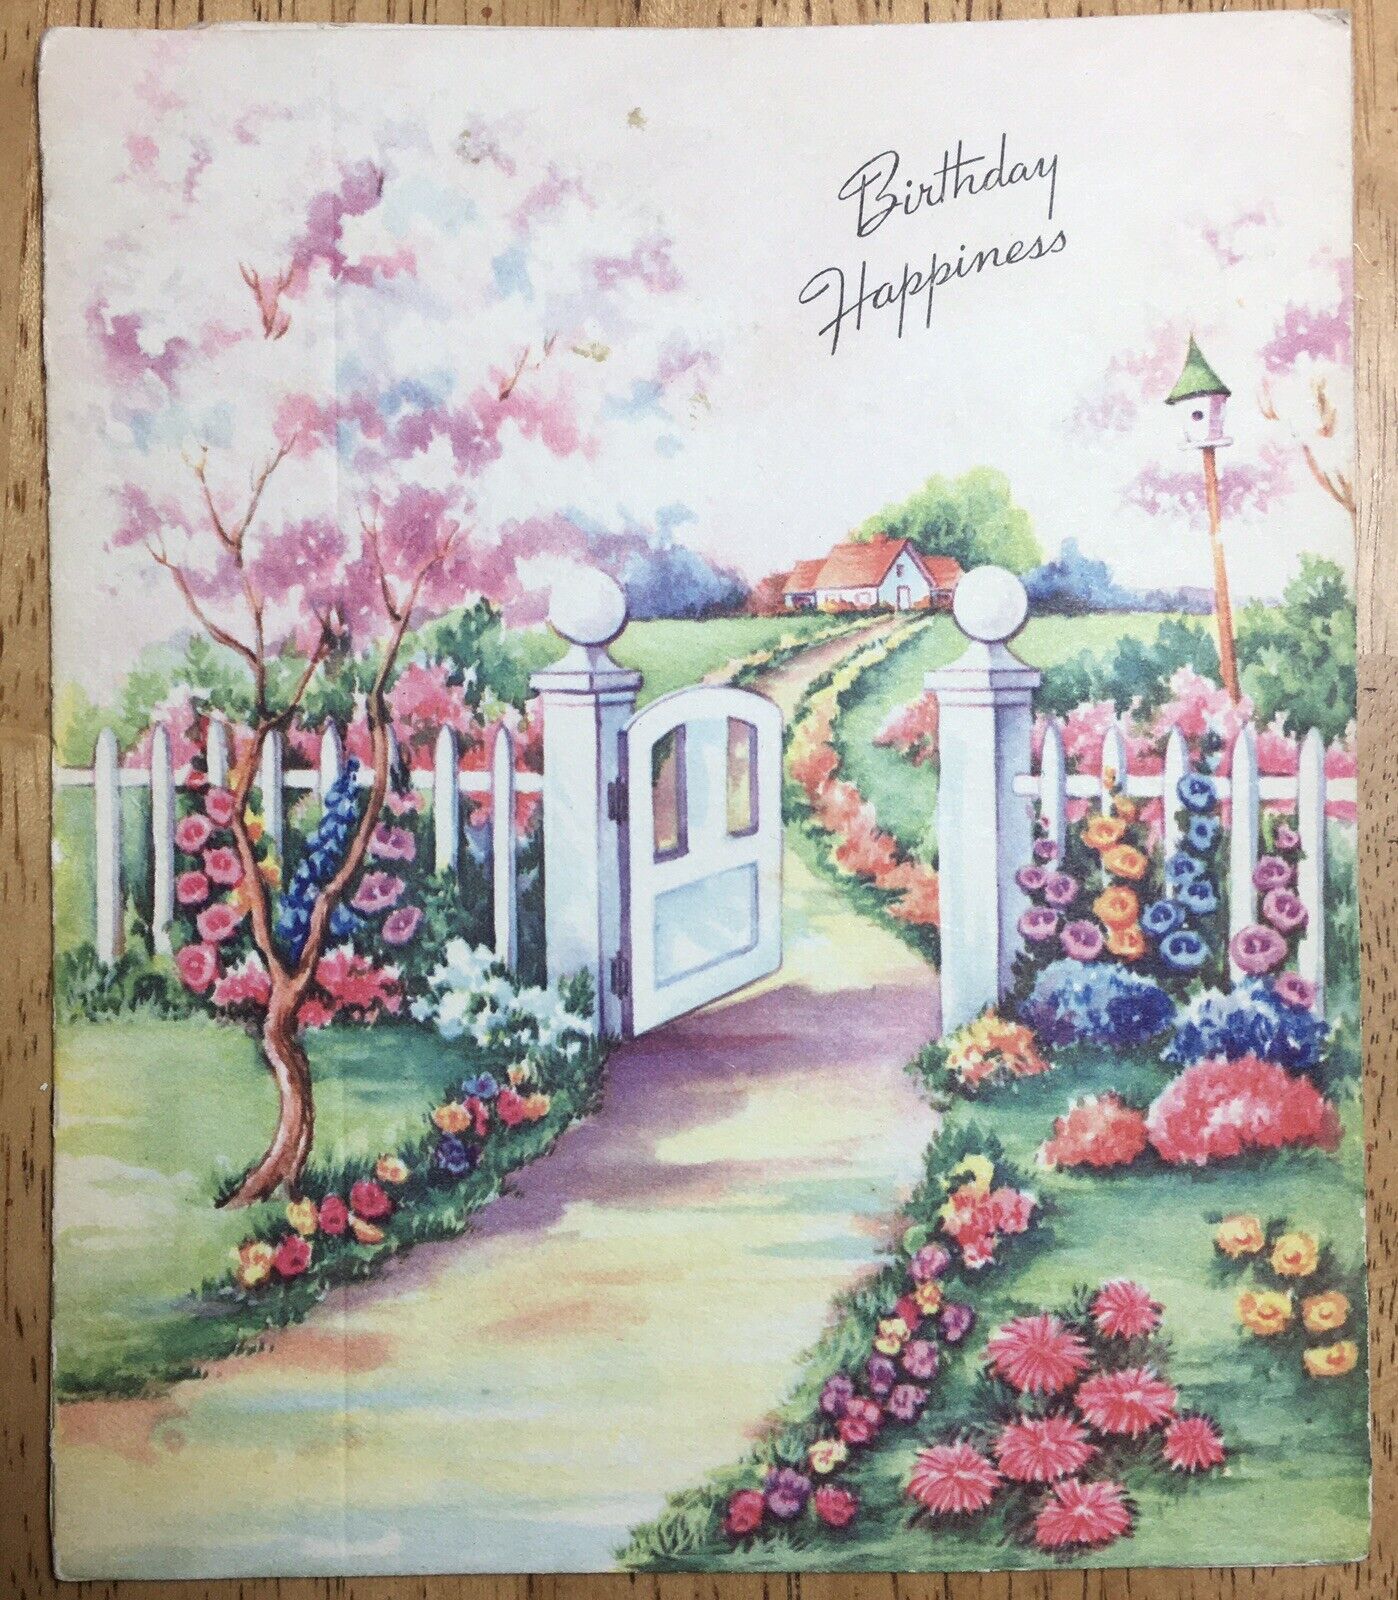 Vintage A.G.C.C. Birthday Happiness Card, Flowers, 3D Landscape, Fold-Out Pop Up